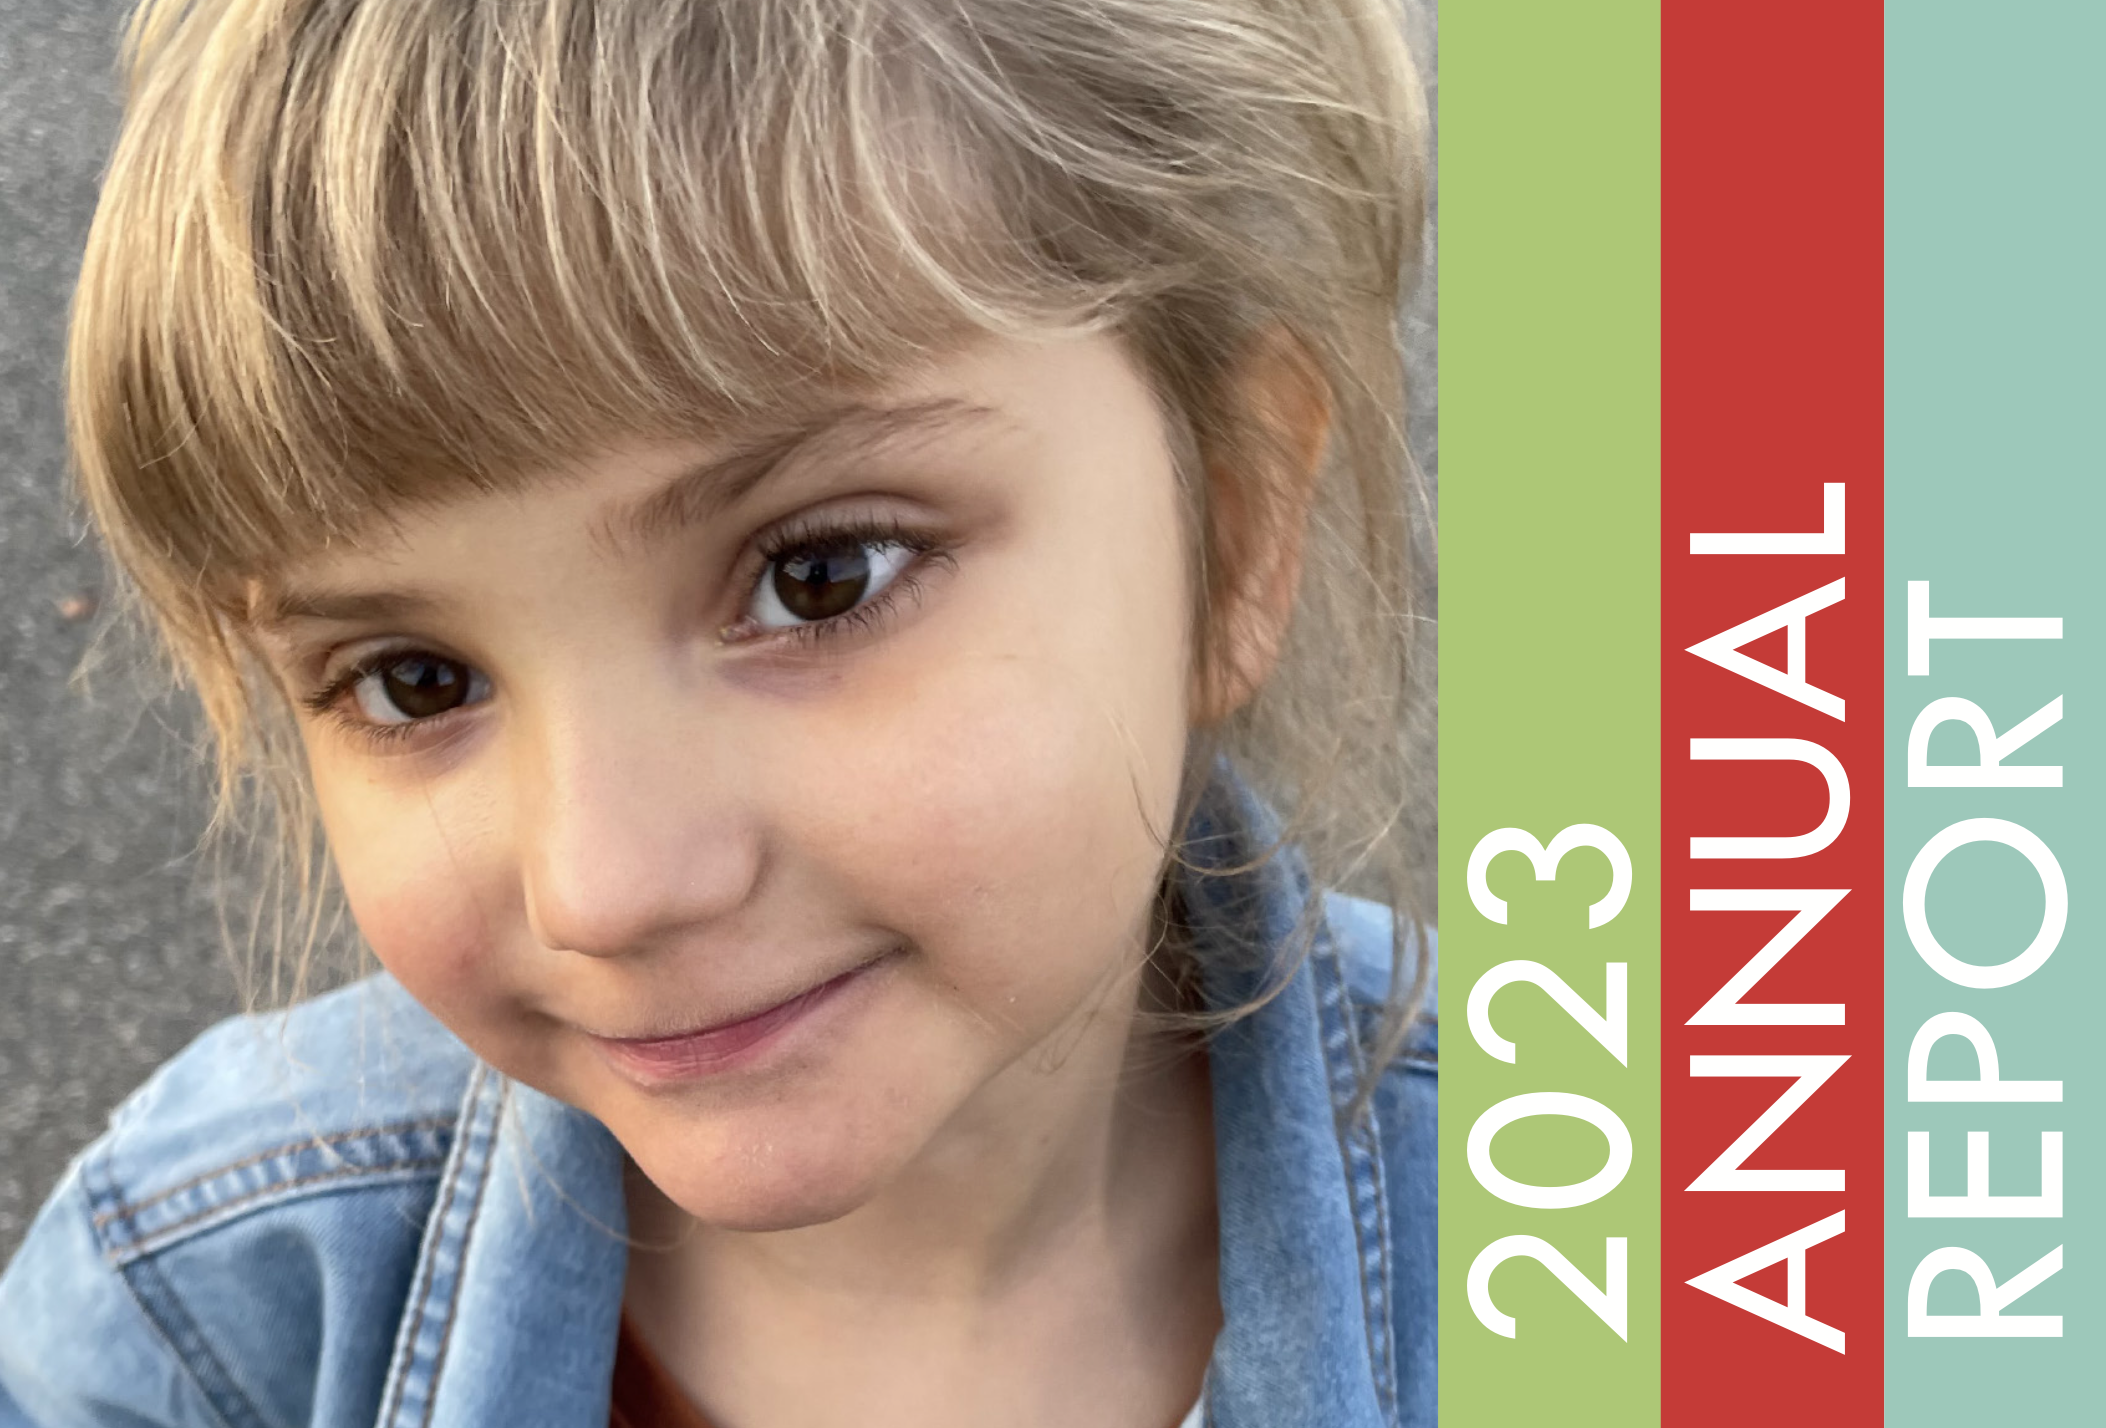 Child smiling at the camera, 2023 Annual Report written on the right side